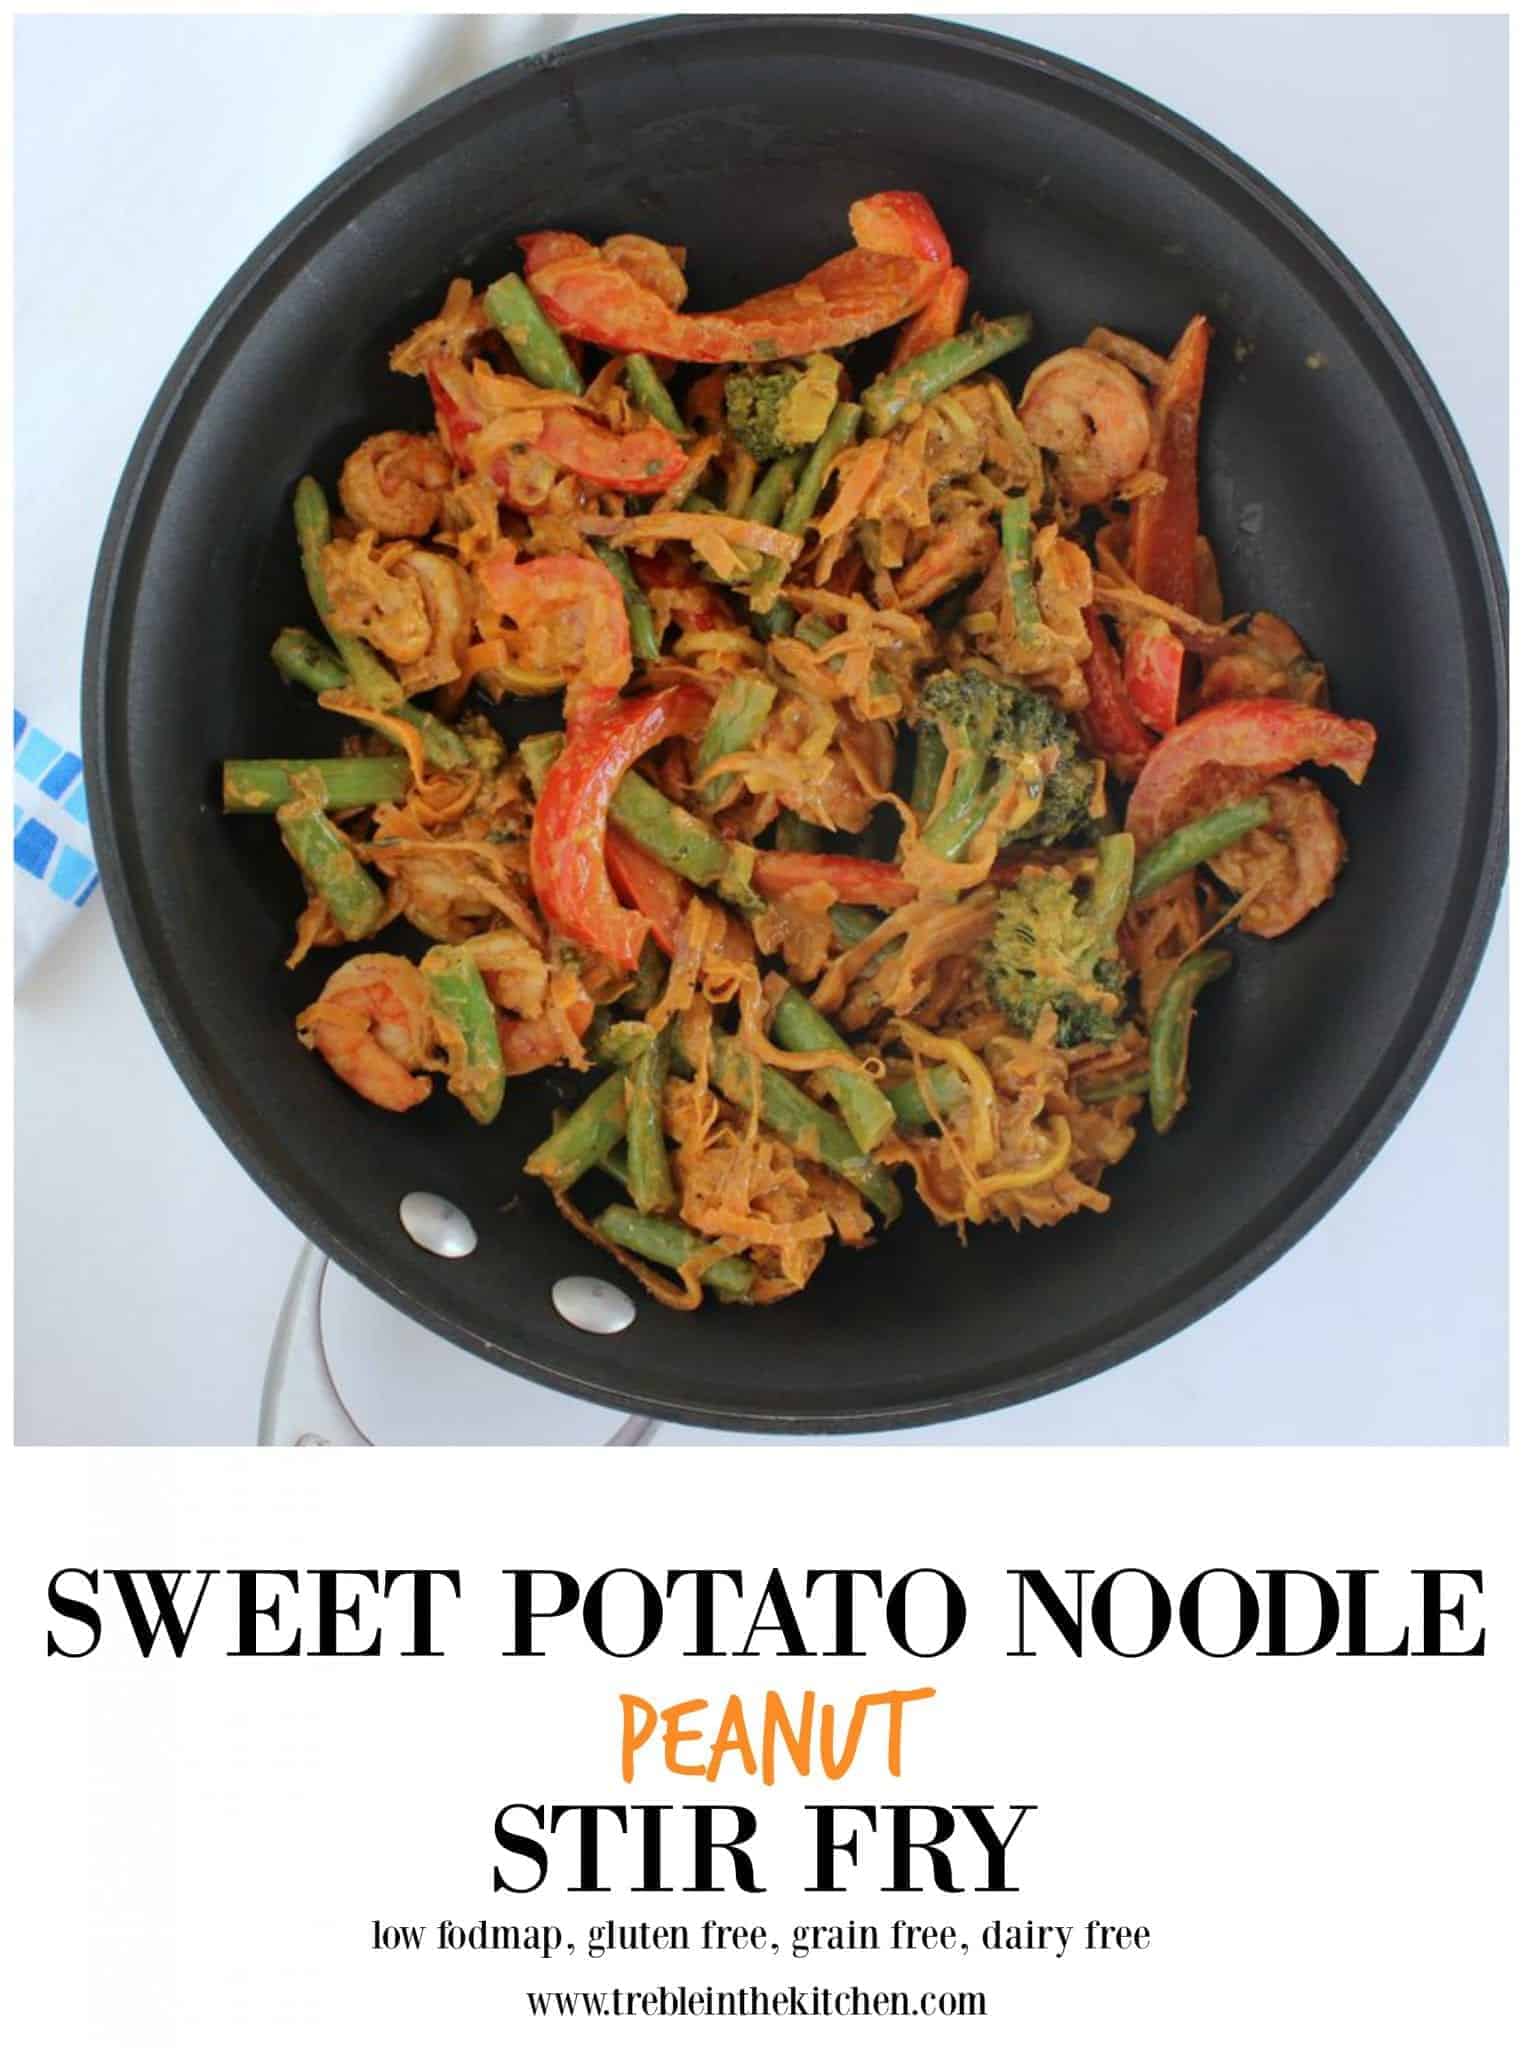 Sweet Potato Noodle Peanut Stir Fry from Treble in the Kitchen